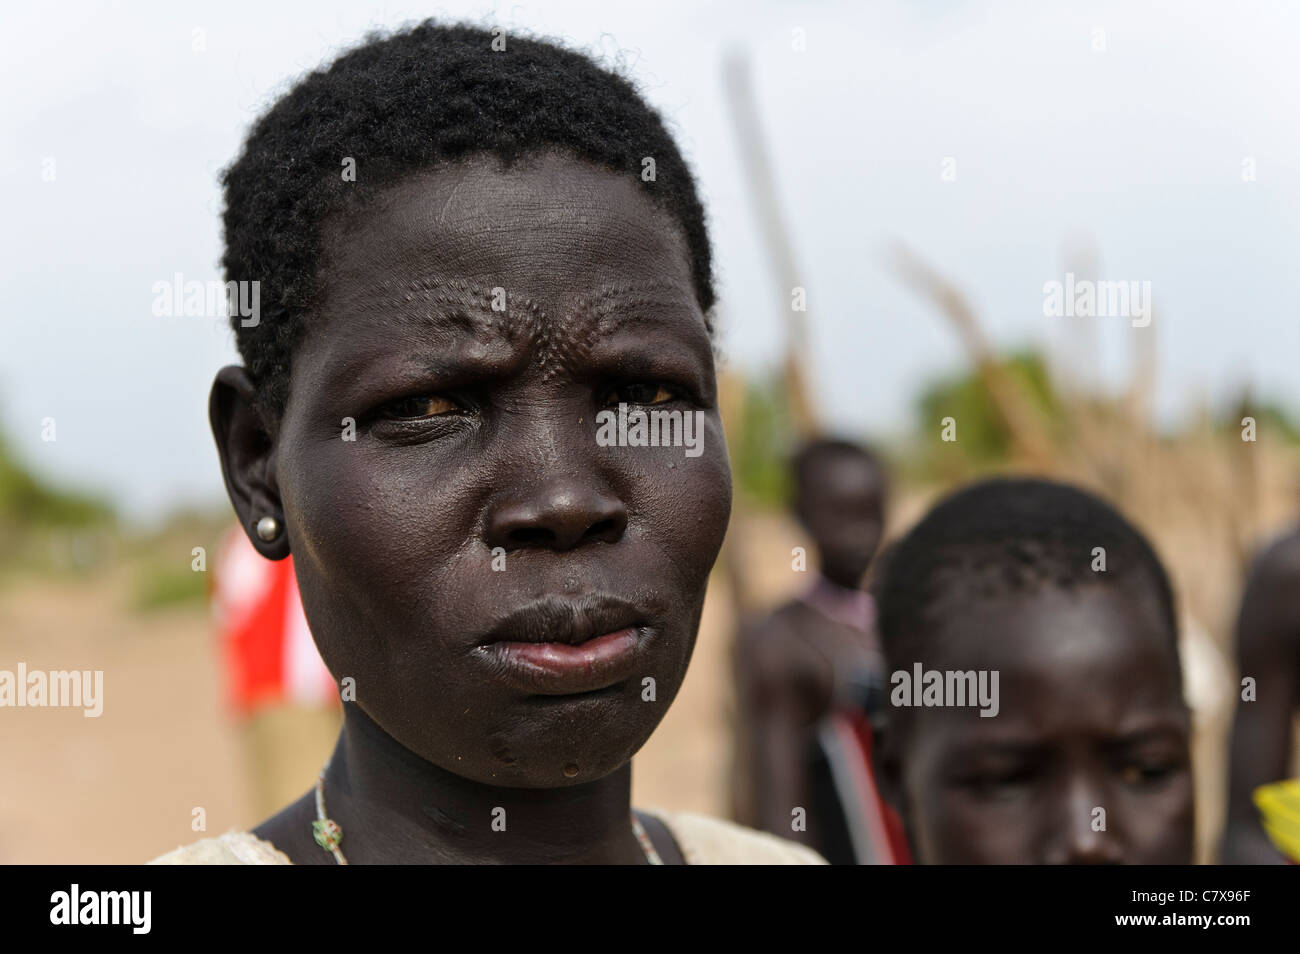 Dinka woman with decorative scars on her forehead, Luonyaker, Bahr el Ghazal, South Sudan. Stock Photo